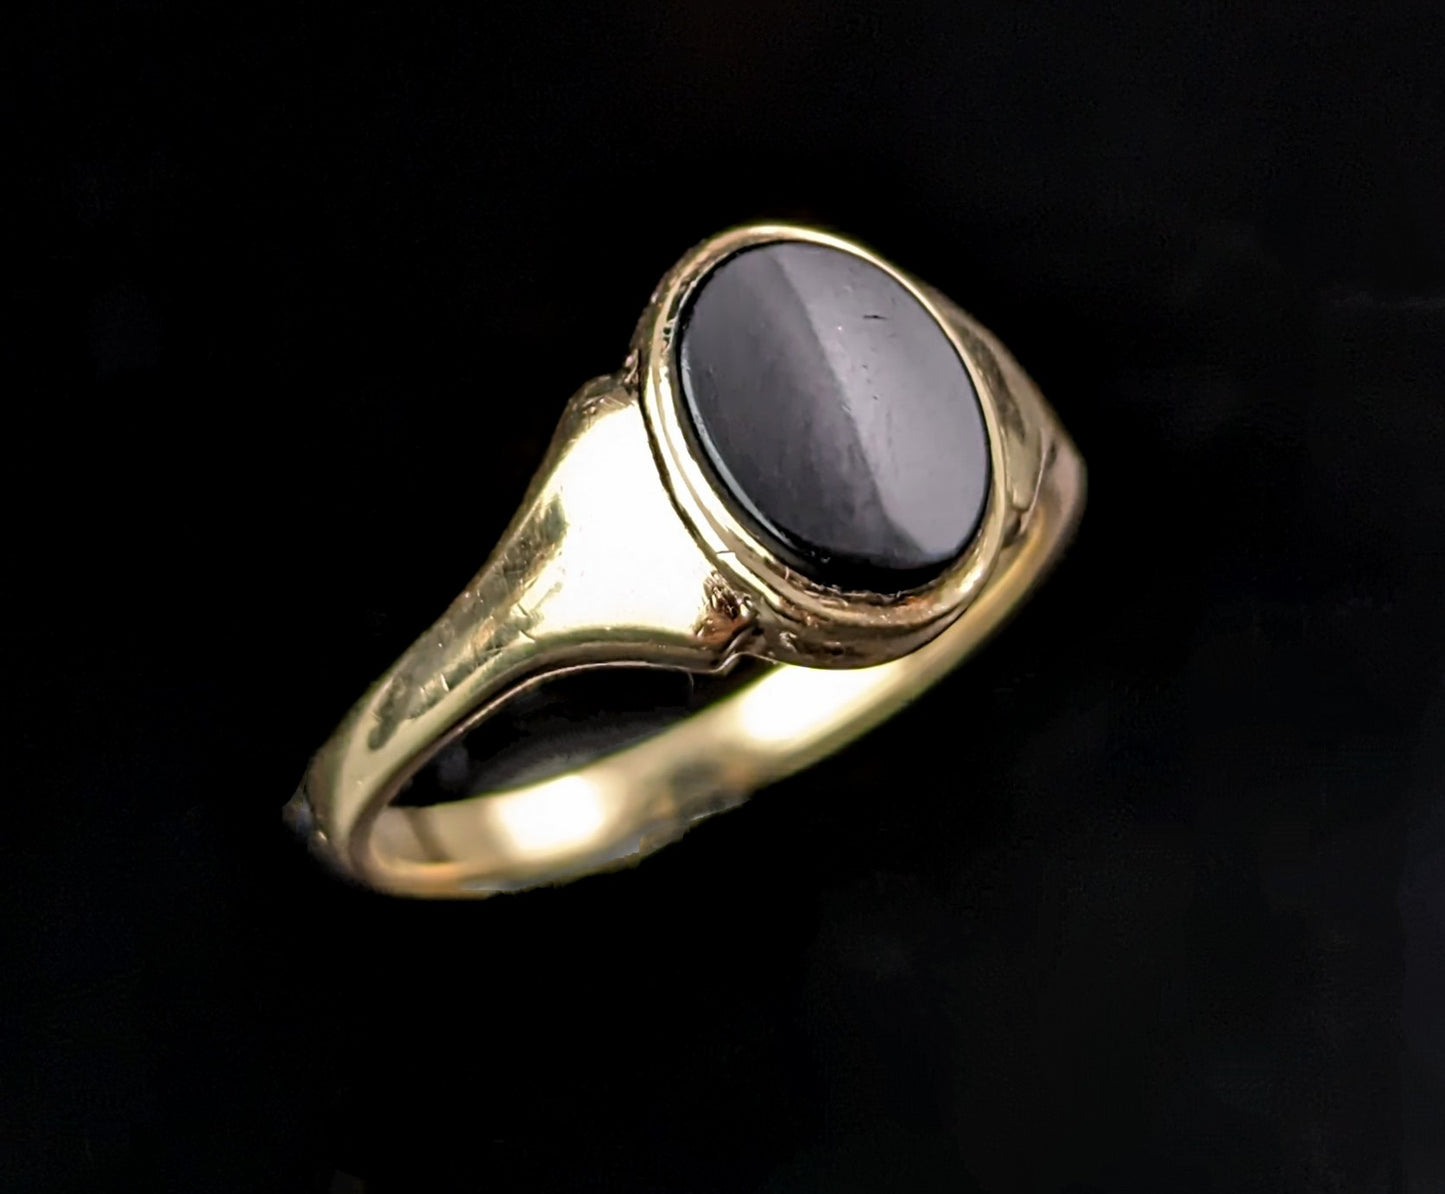 Vintage 9ct gold and Onyx signet ring, Pinky ring